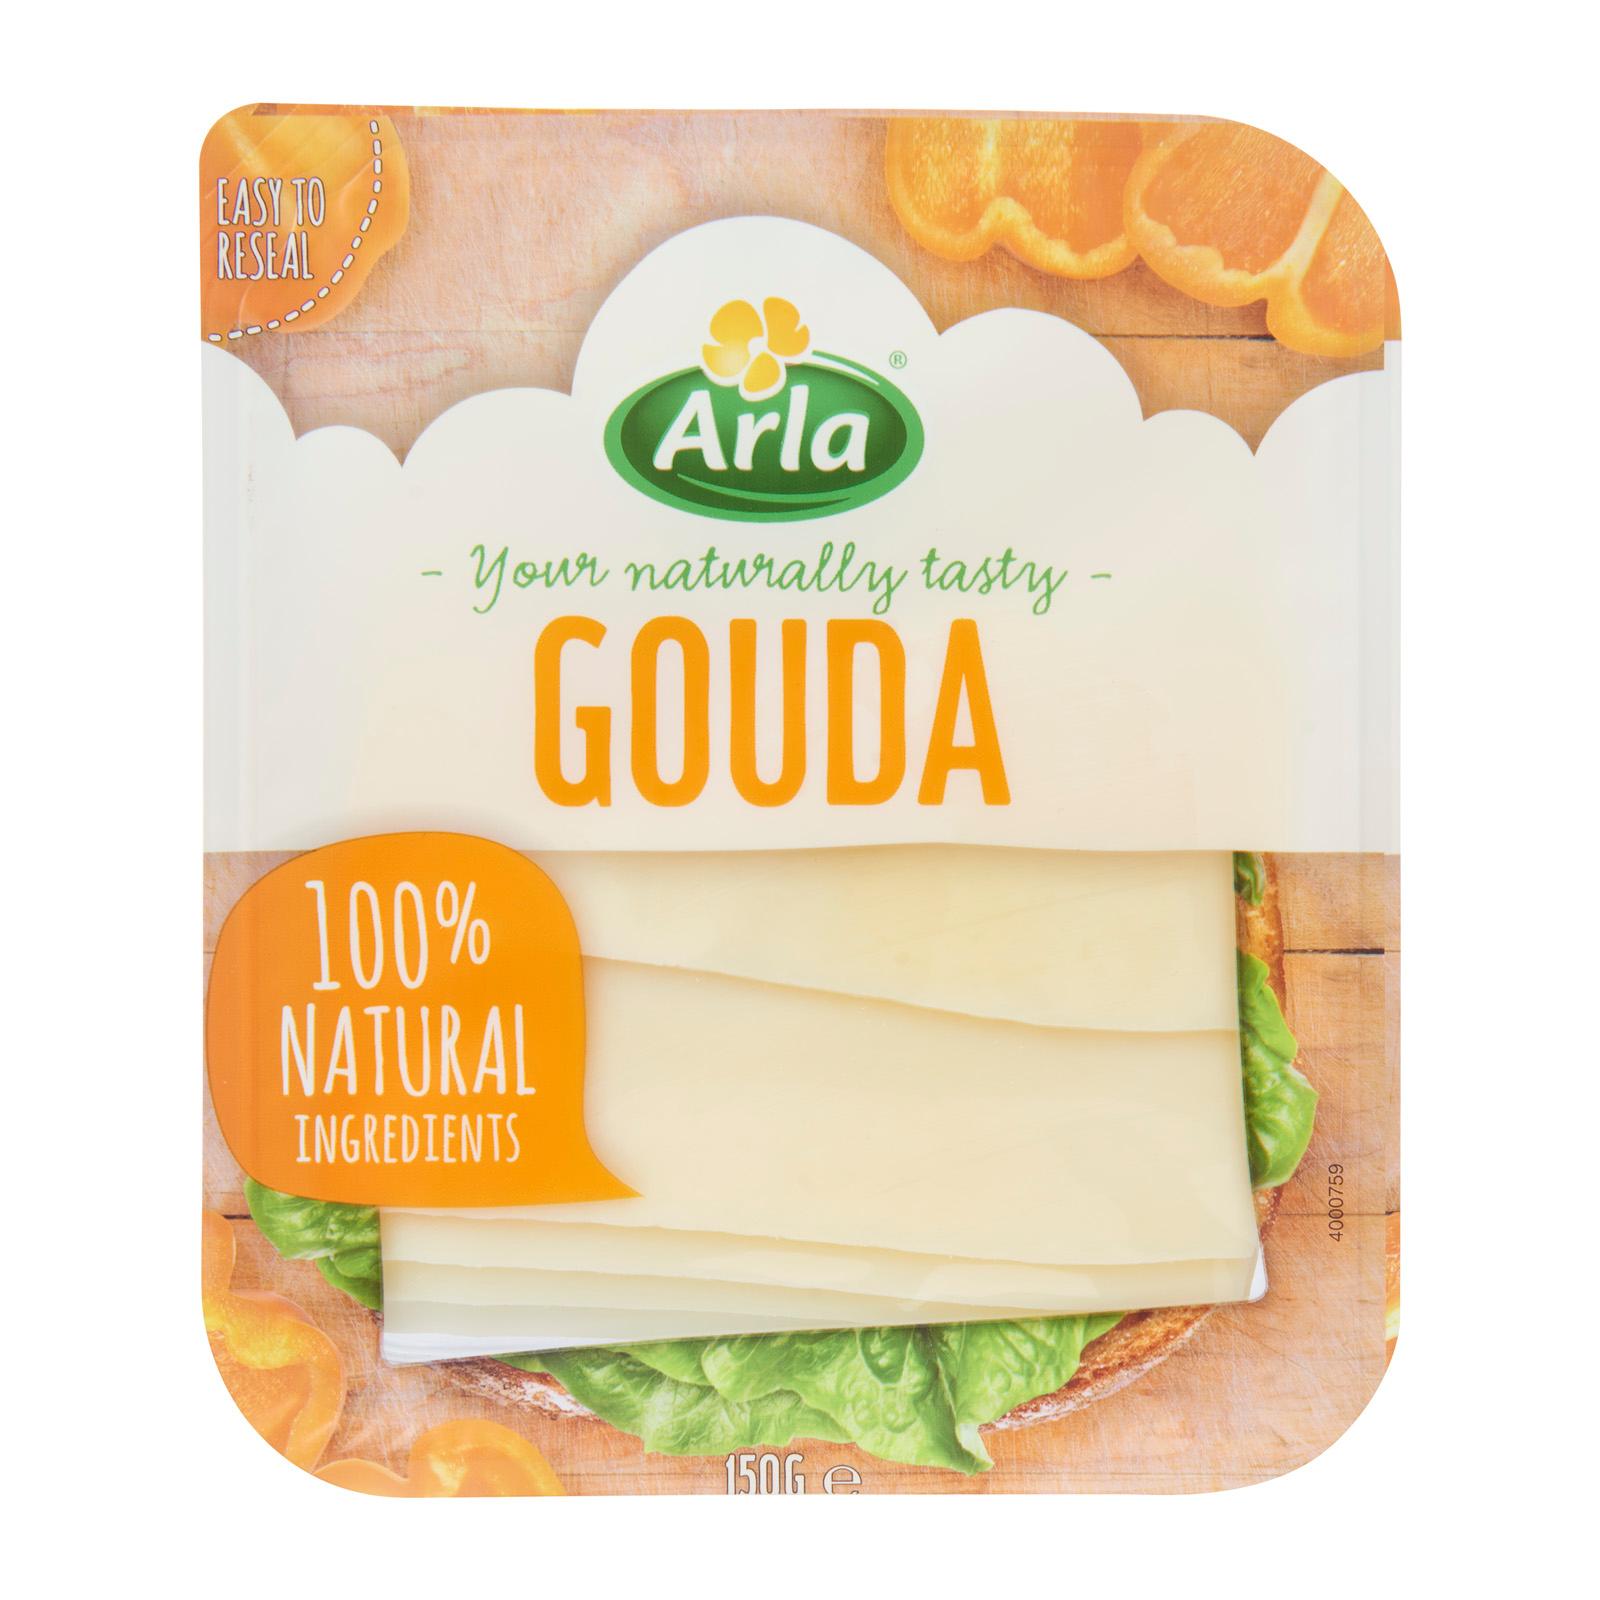 Arla Gouda Cheese Slices 150g - from RedMart